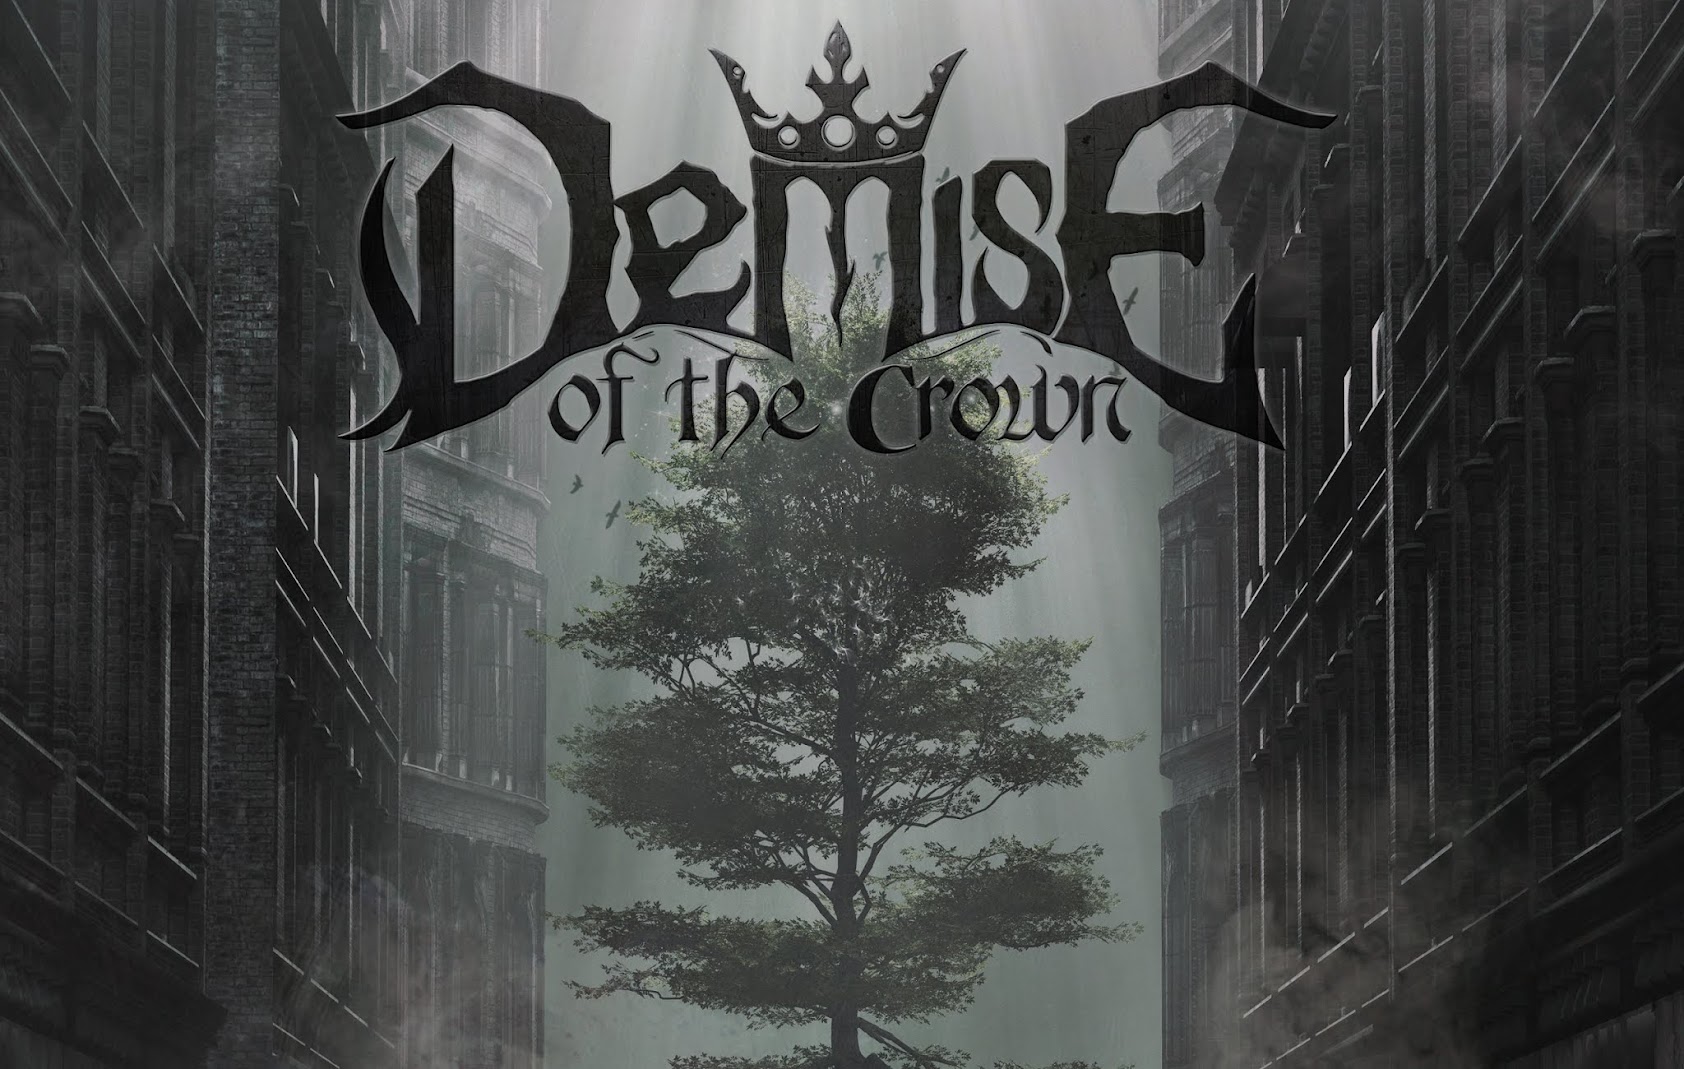 Demise show. Dying for the Crown. Wildness 2020 Ultimate Demise. Demise of the Crown Metal Band. Demise of the Crown -Canadian Metal Band.